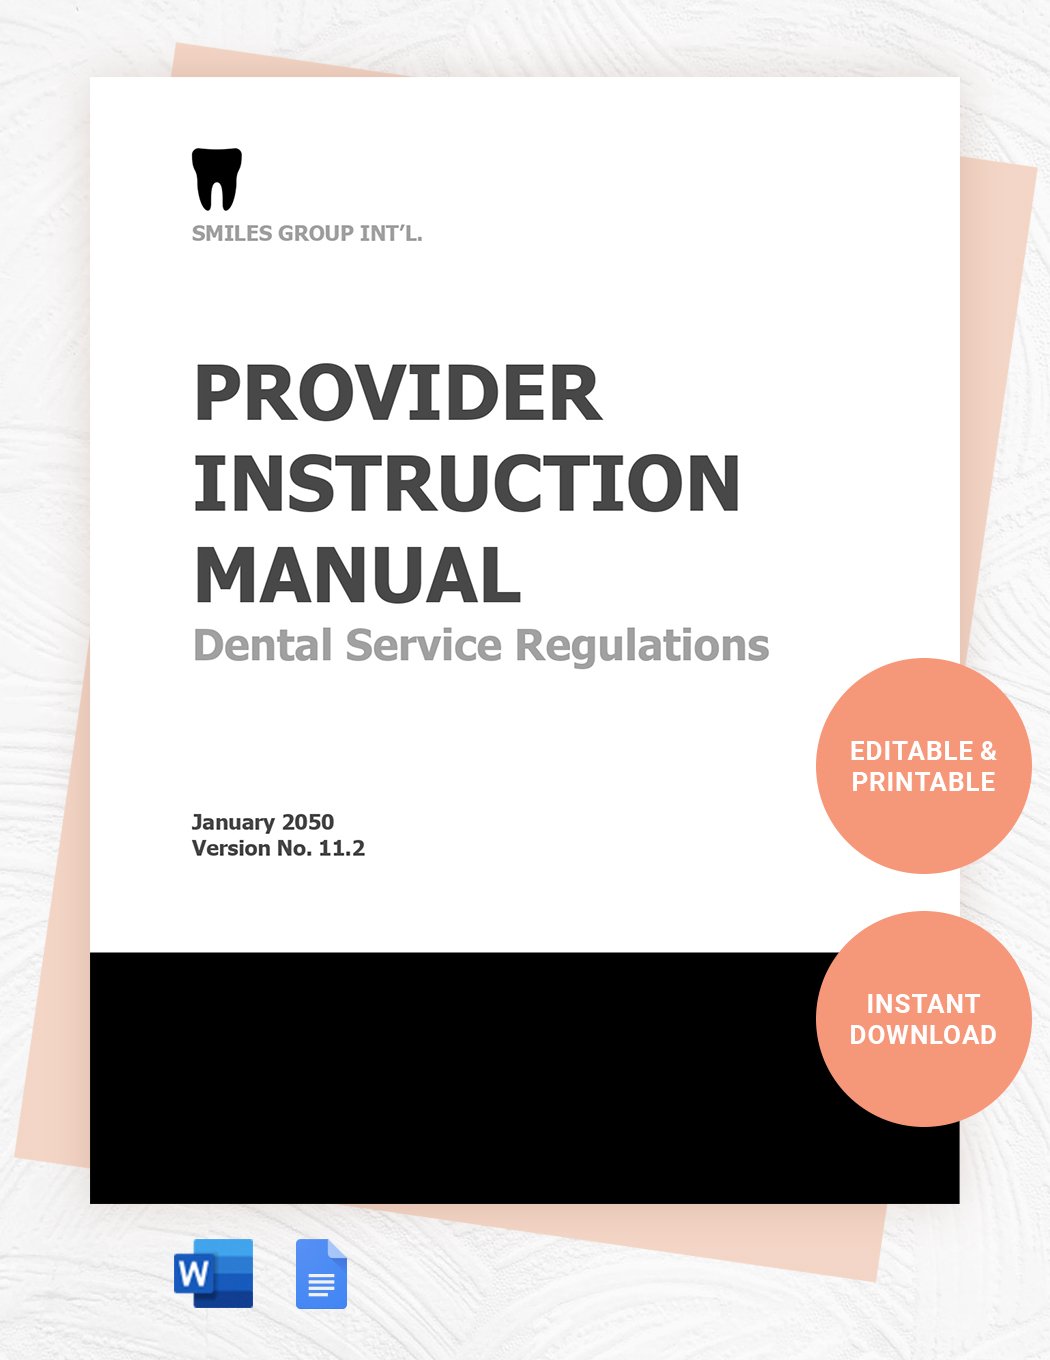 Provider Instruction Manual Template